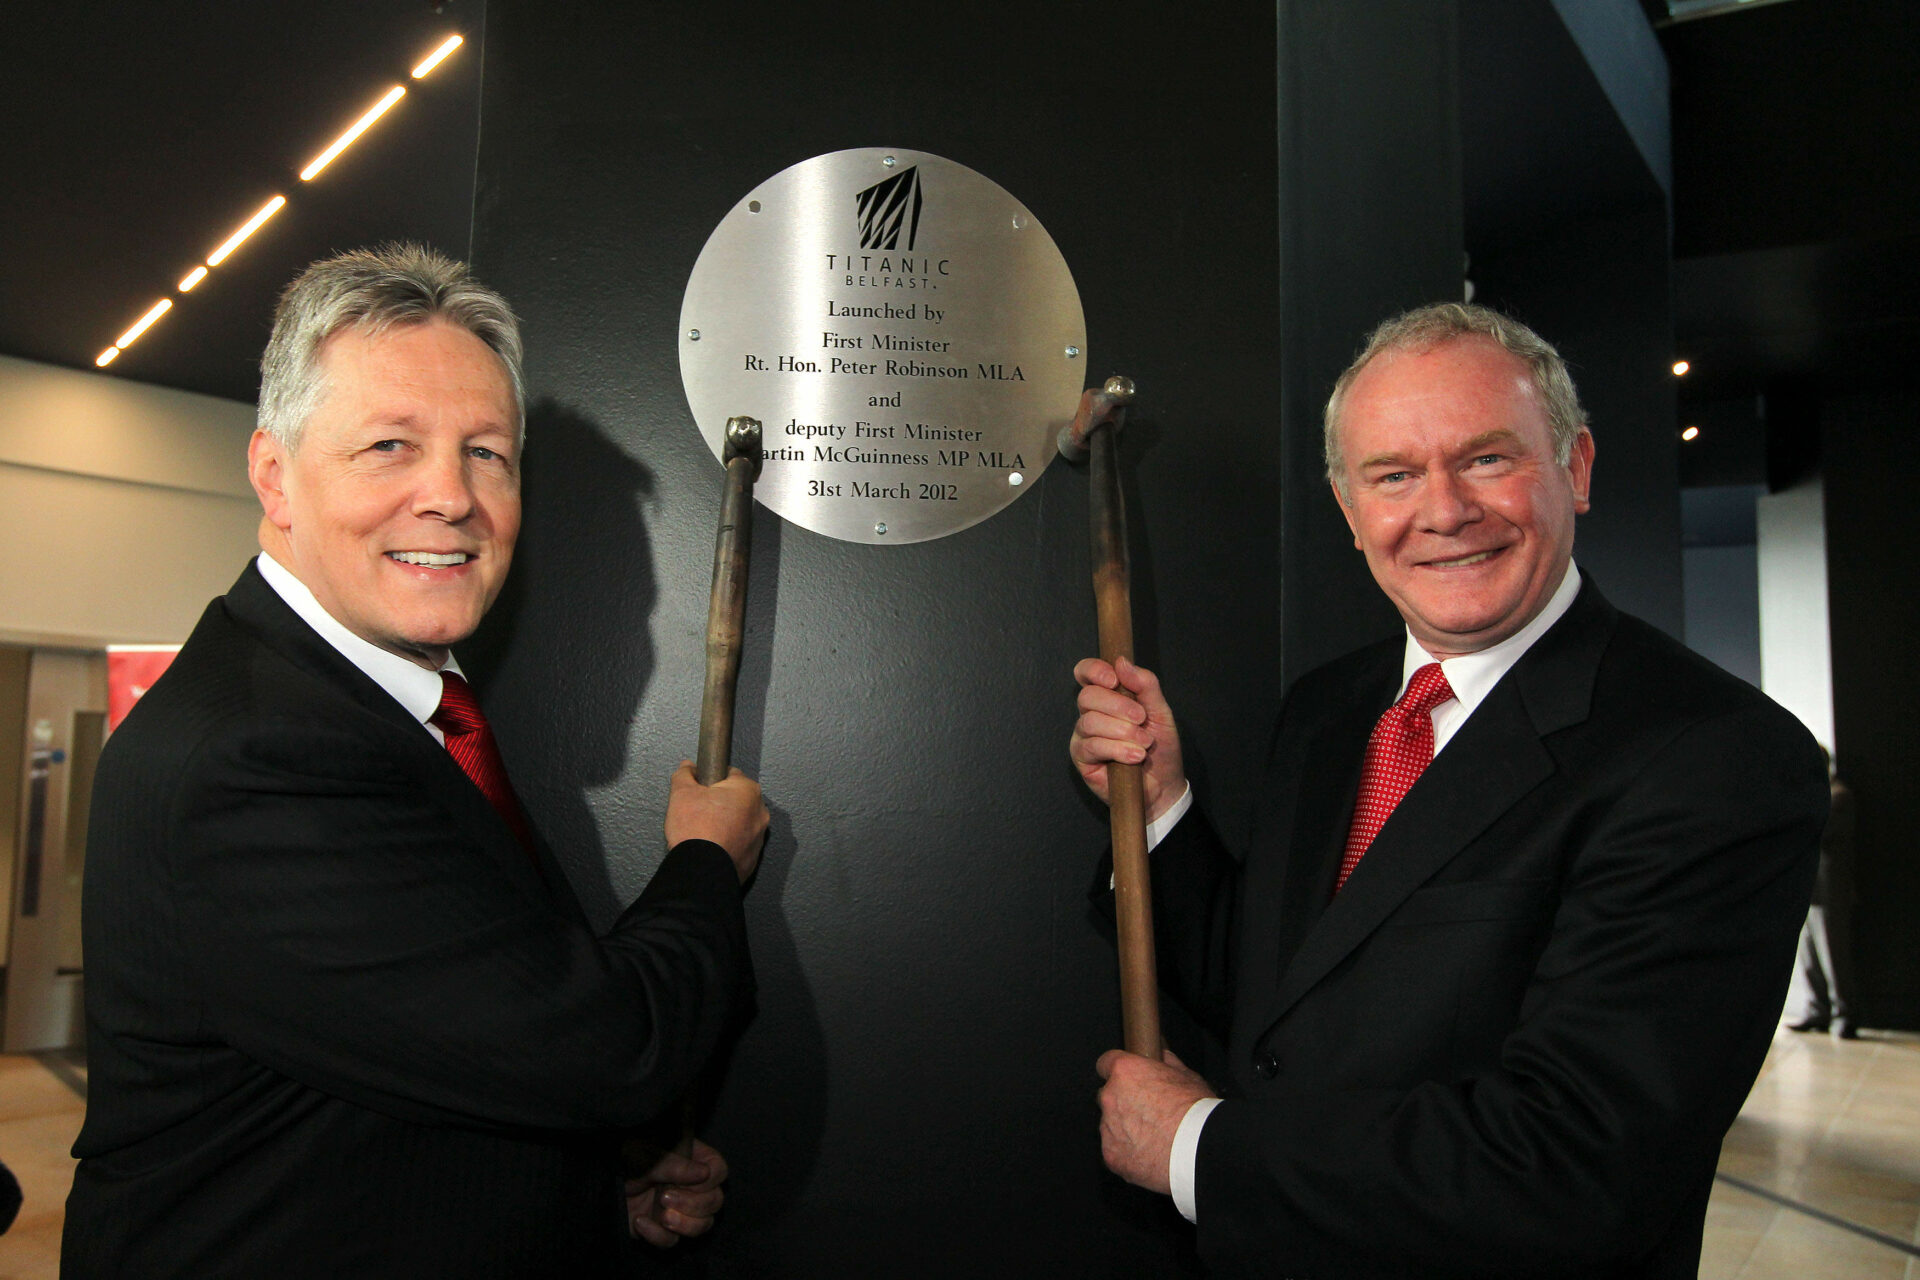 Press Eye - Belfast - Northern Ireland 

Northern Ireland's First Minister, Peter Robinson (left) and deputy First Minister, Martin McGuinness, unveil a plaque to open Titanic Belfast, the world's largest Titanic visitor attraction, located on the site where Titanic was built. 
Mandatory credit: Picture by Brian Thompson/ Presseye.com